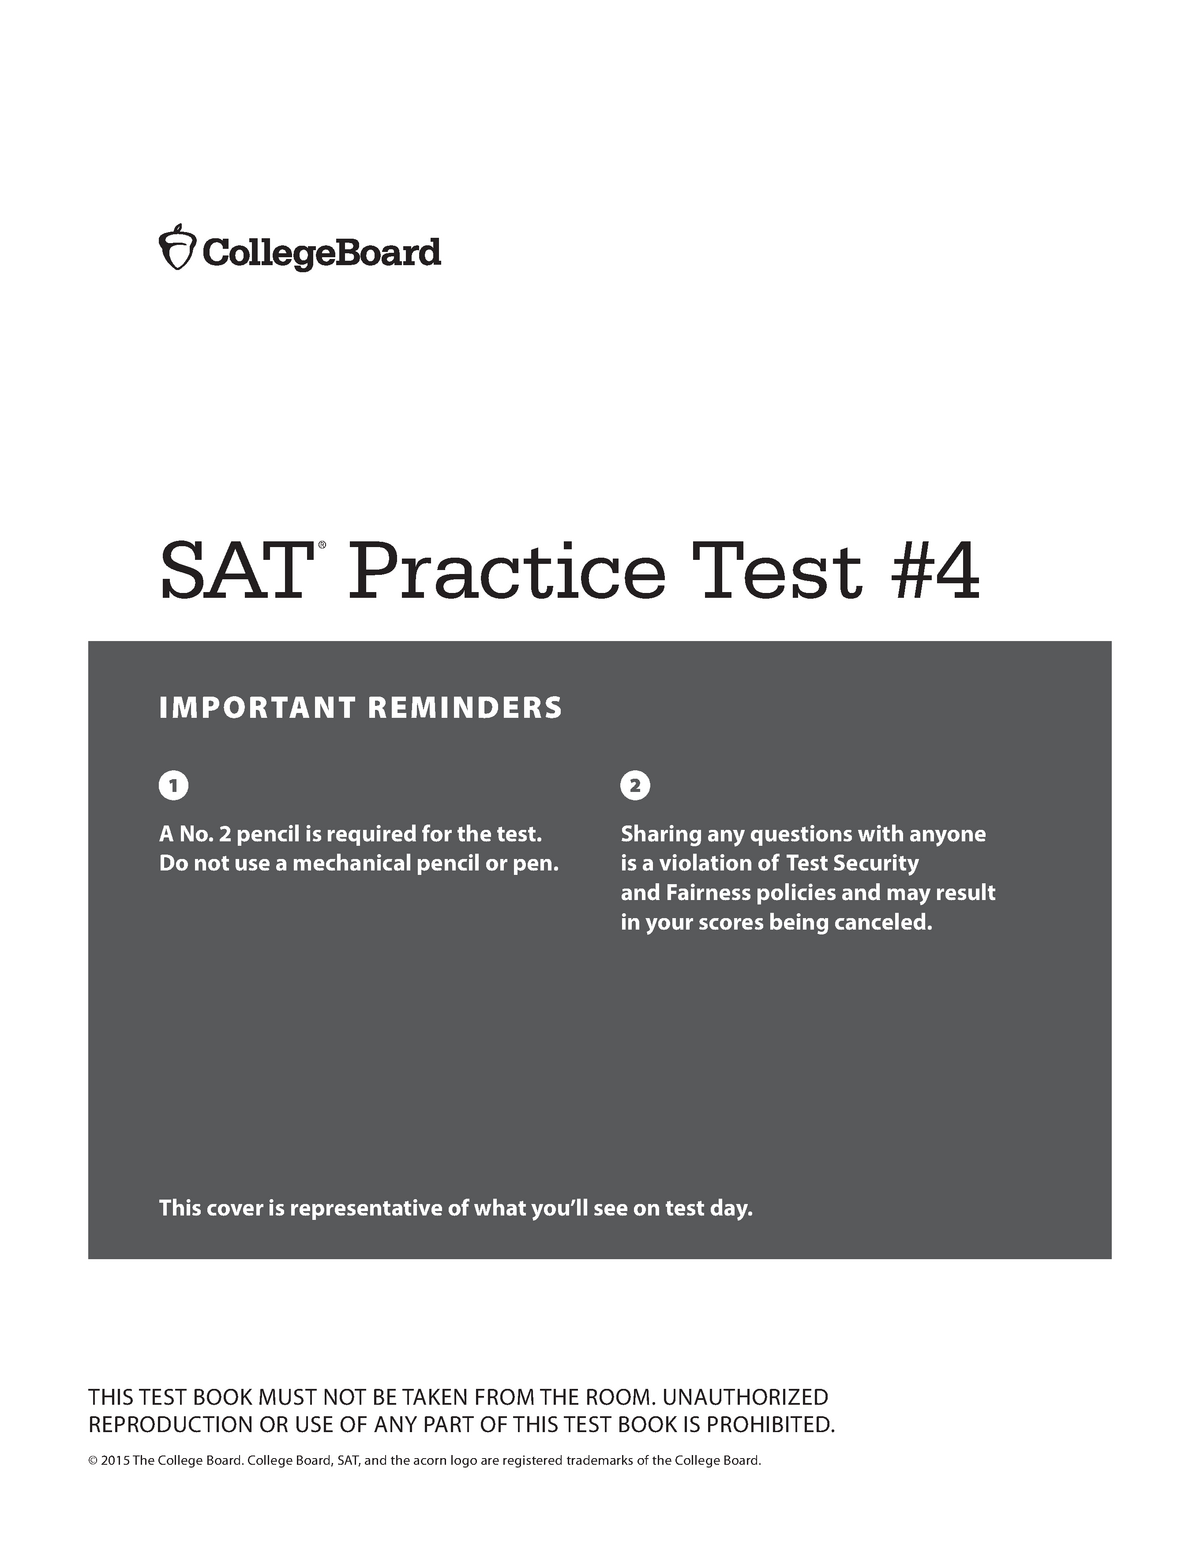 sat-practice-test-4-important-reminders-sat-practice-test-a-no-2-pencil-is-required